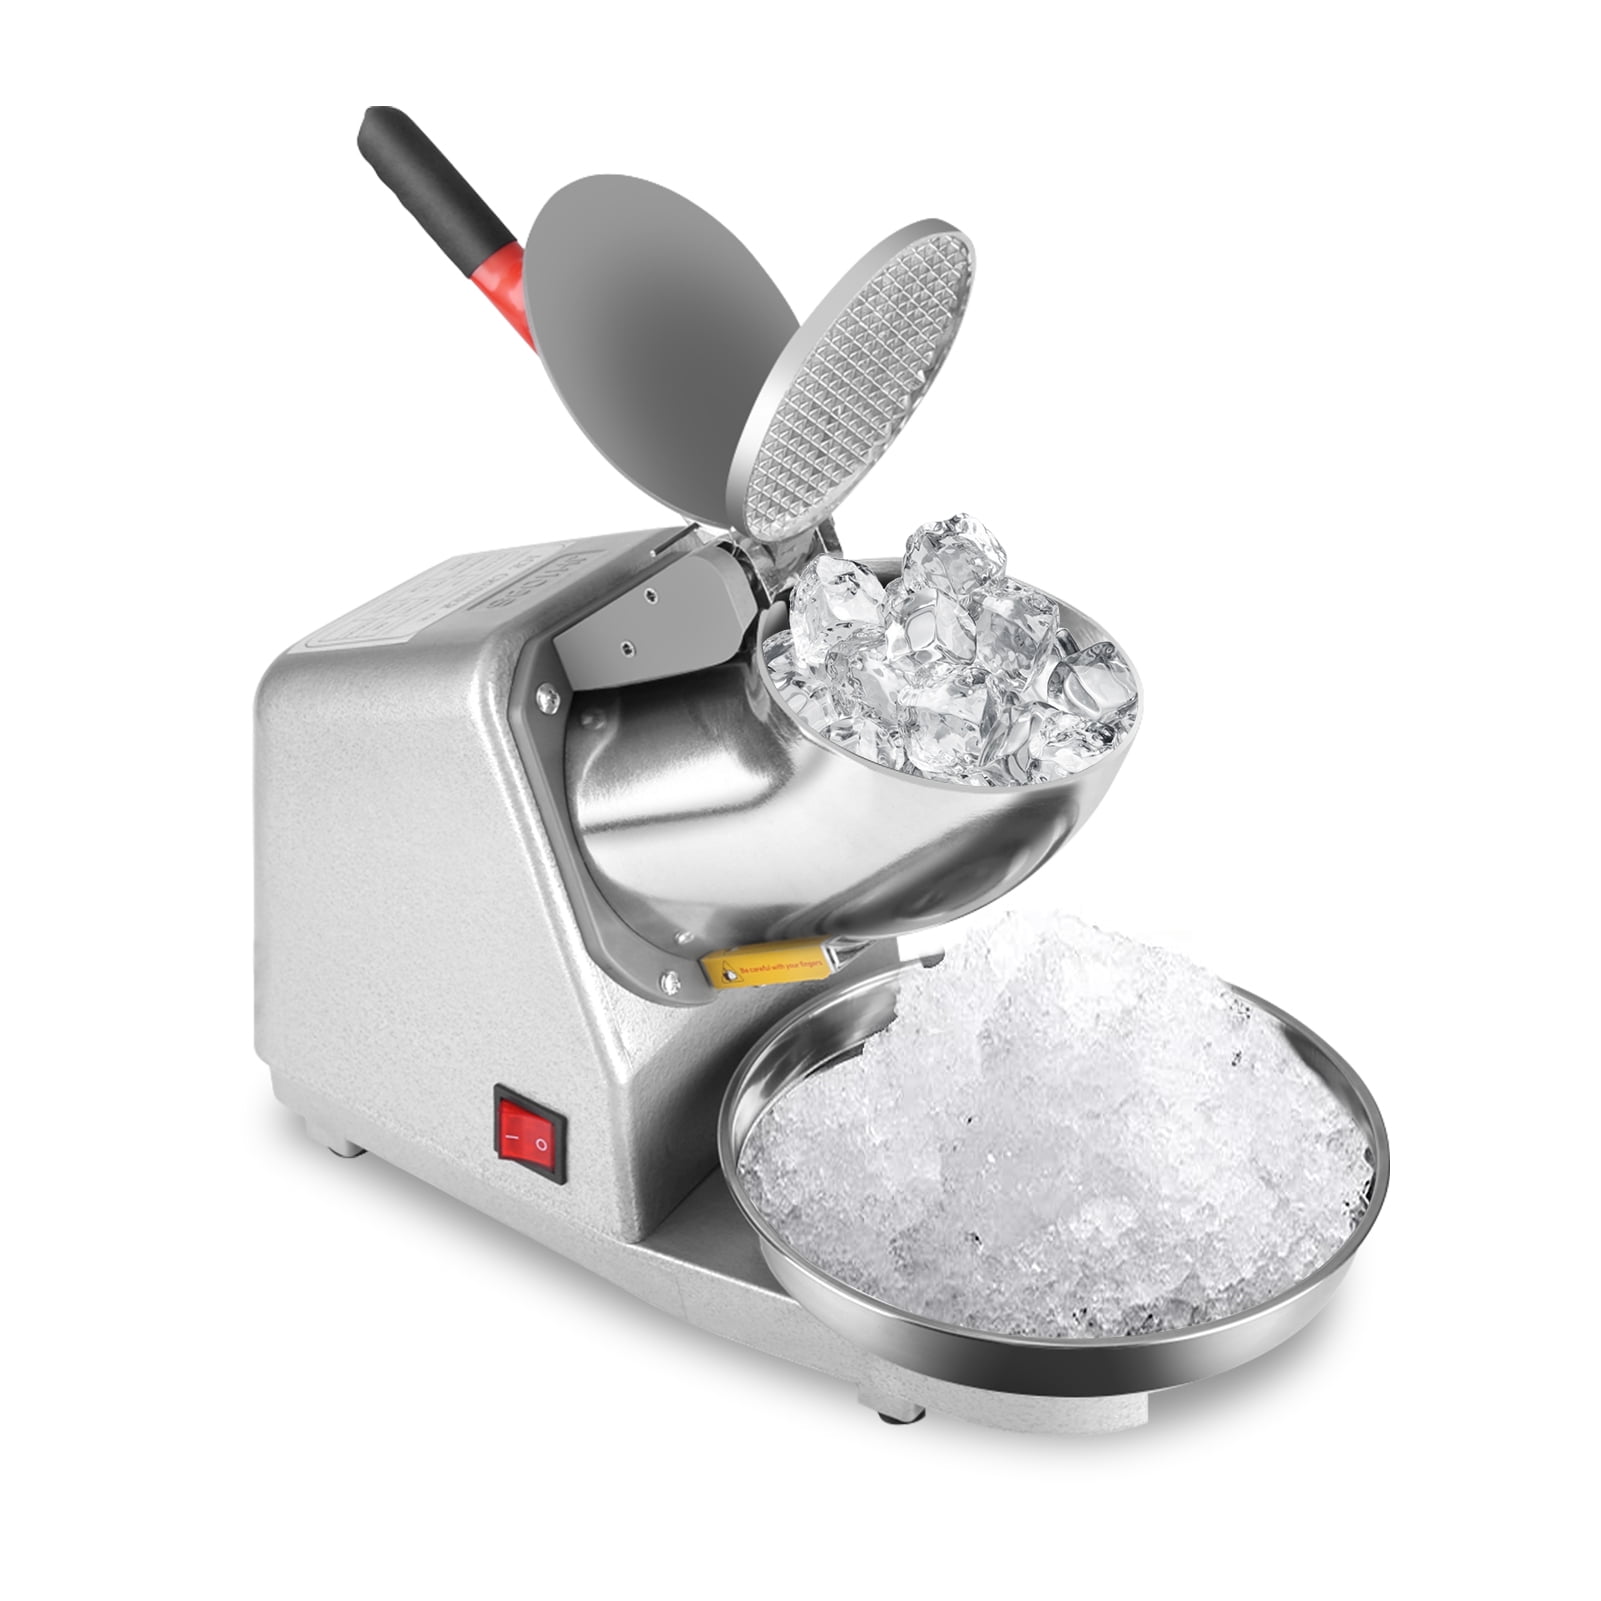 Ice Crusher 300W Commercial Electric Ice Crusher Shaver Machine Stainless Steel Quick Snow Cone Maker 220V 